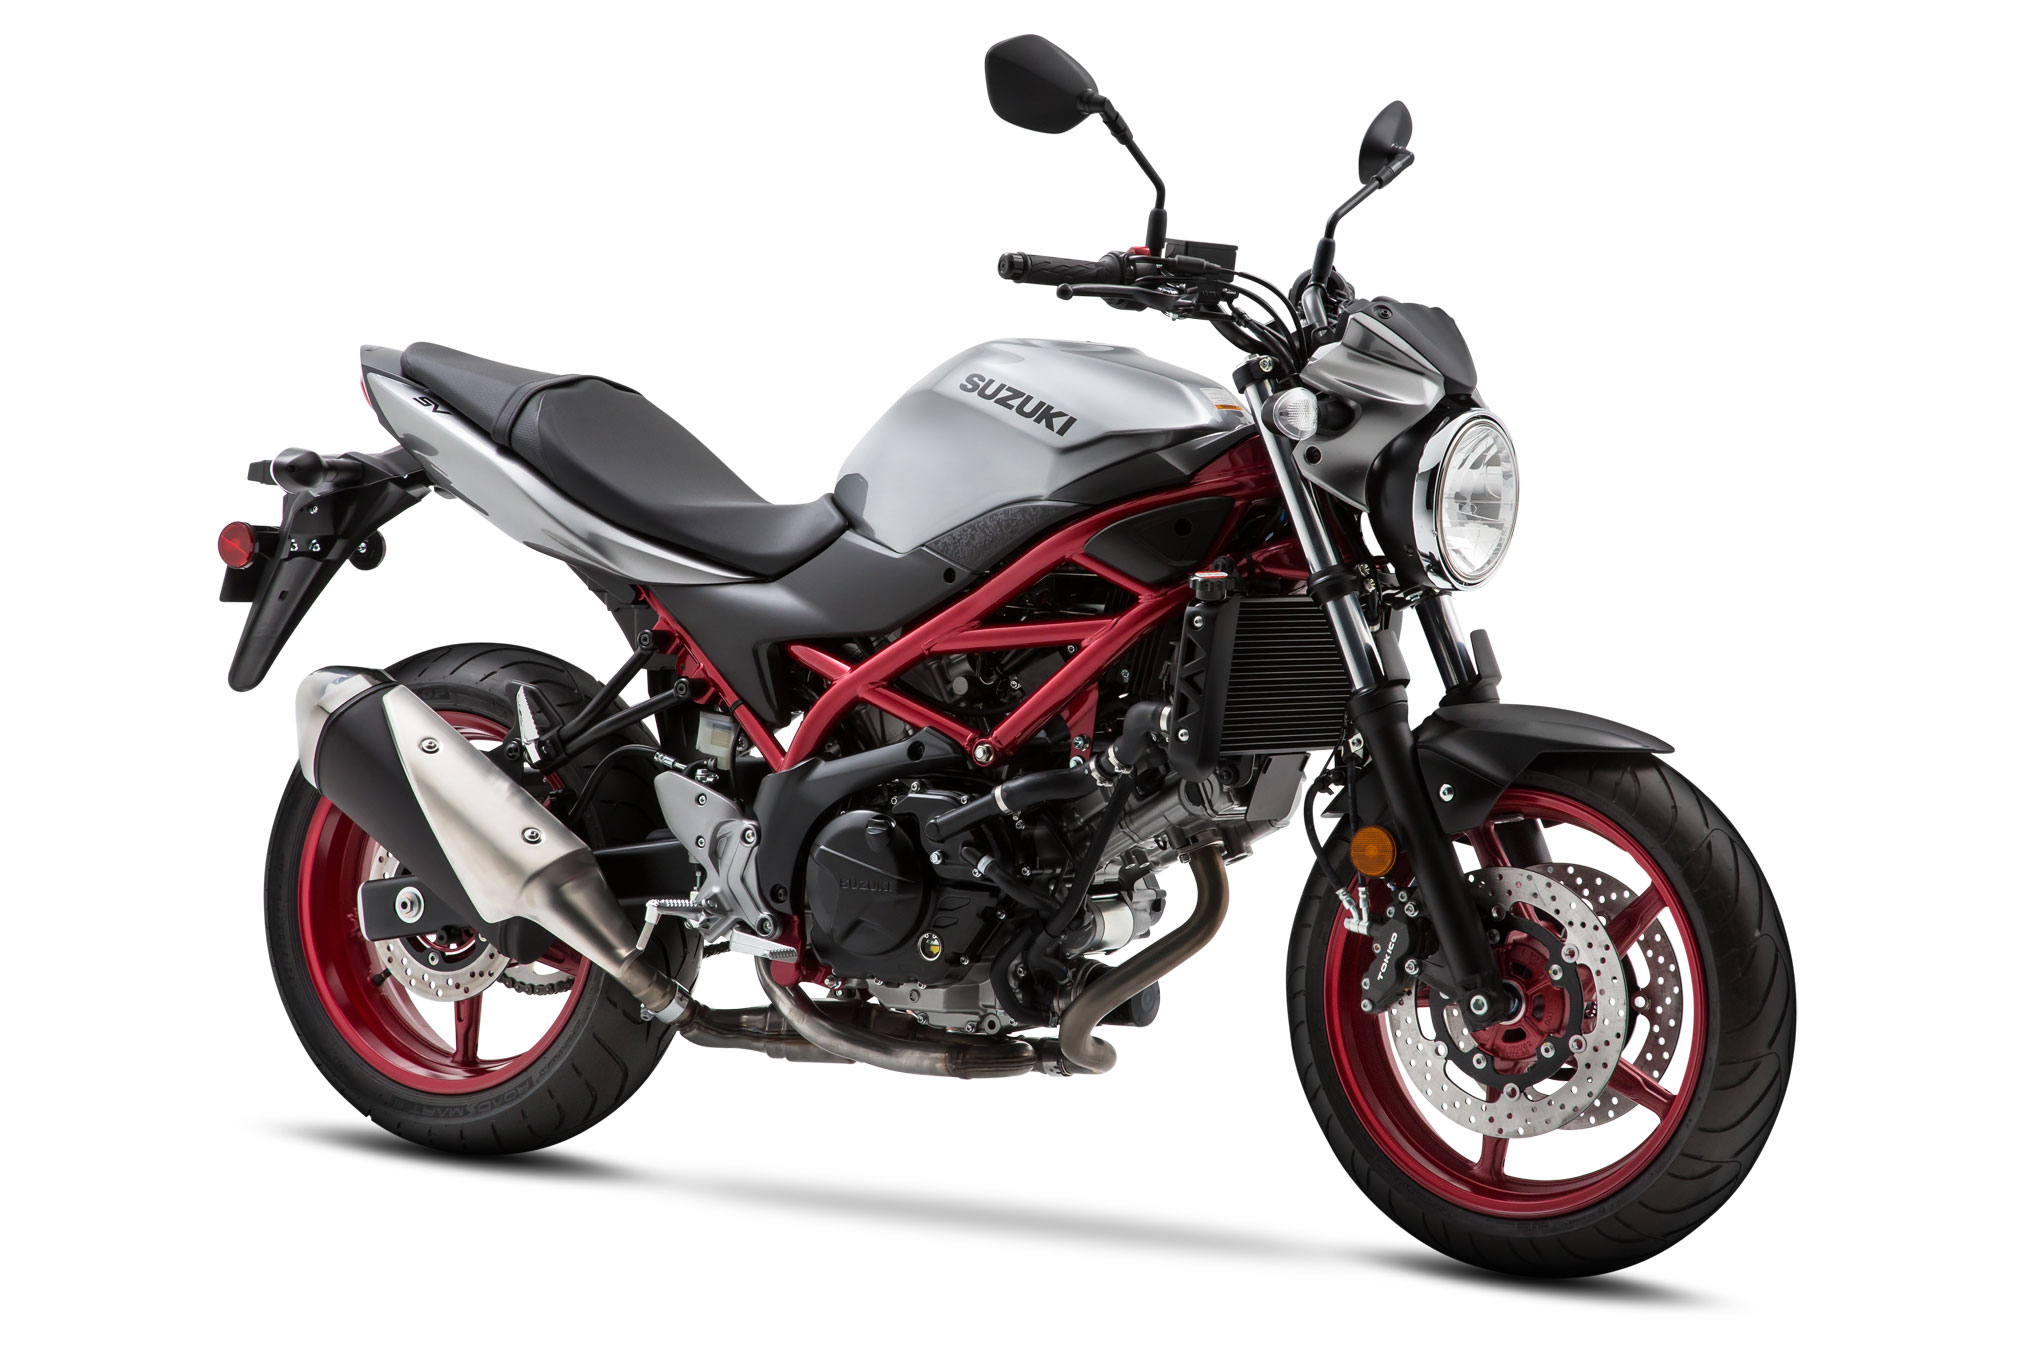 2019 Suzuki SV650 ABS Guide • Total Motorcycle